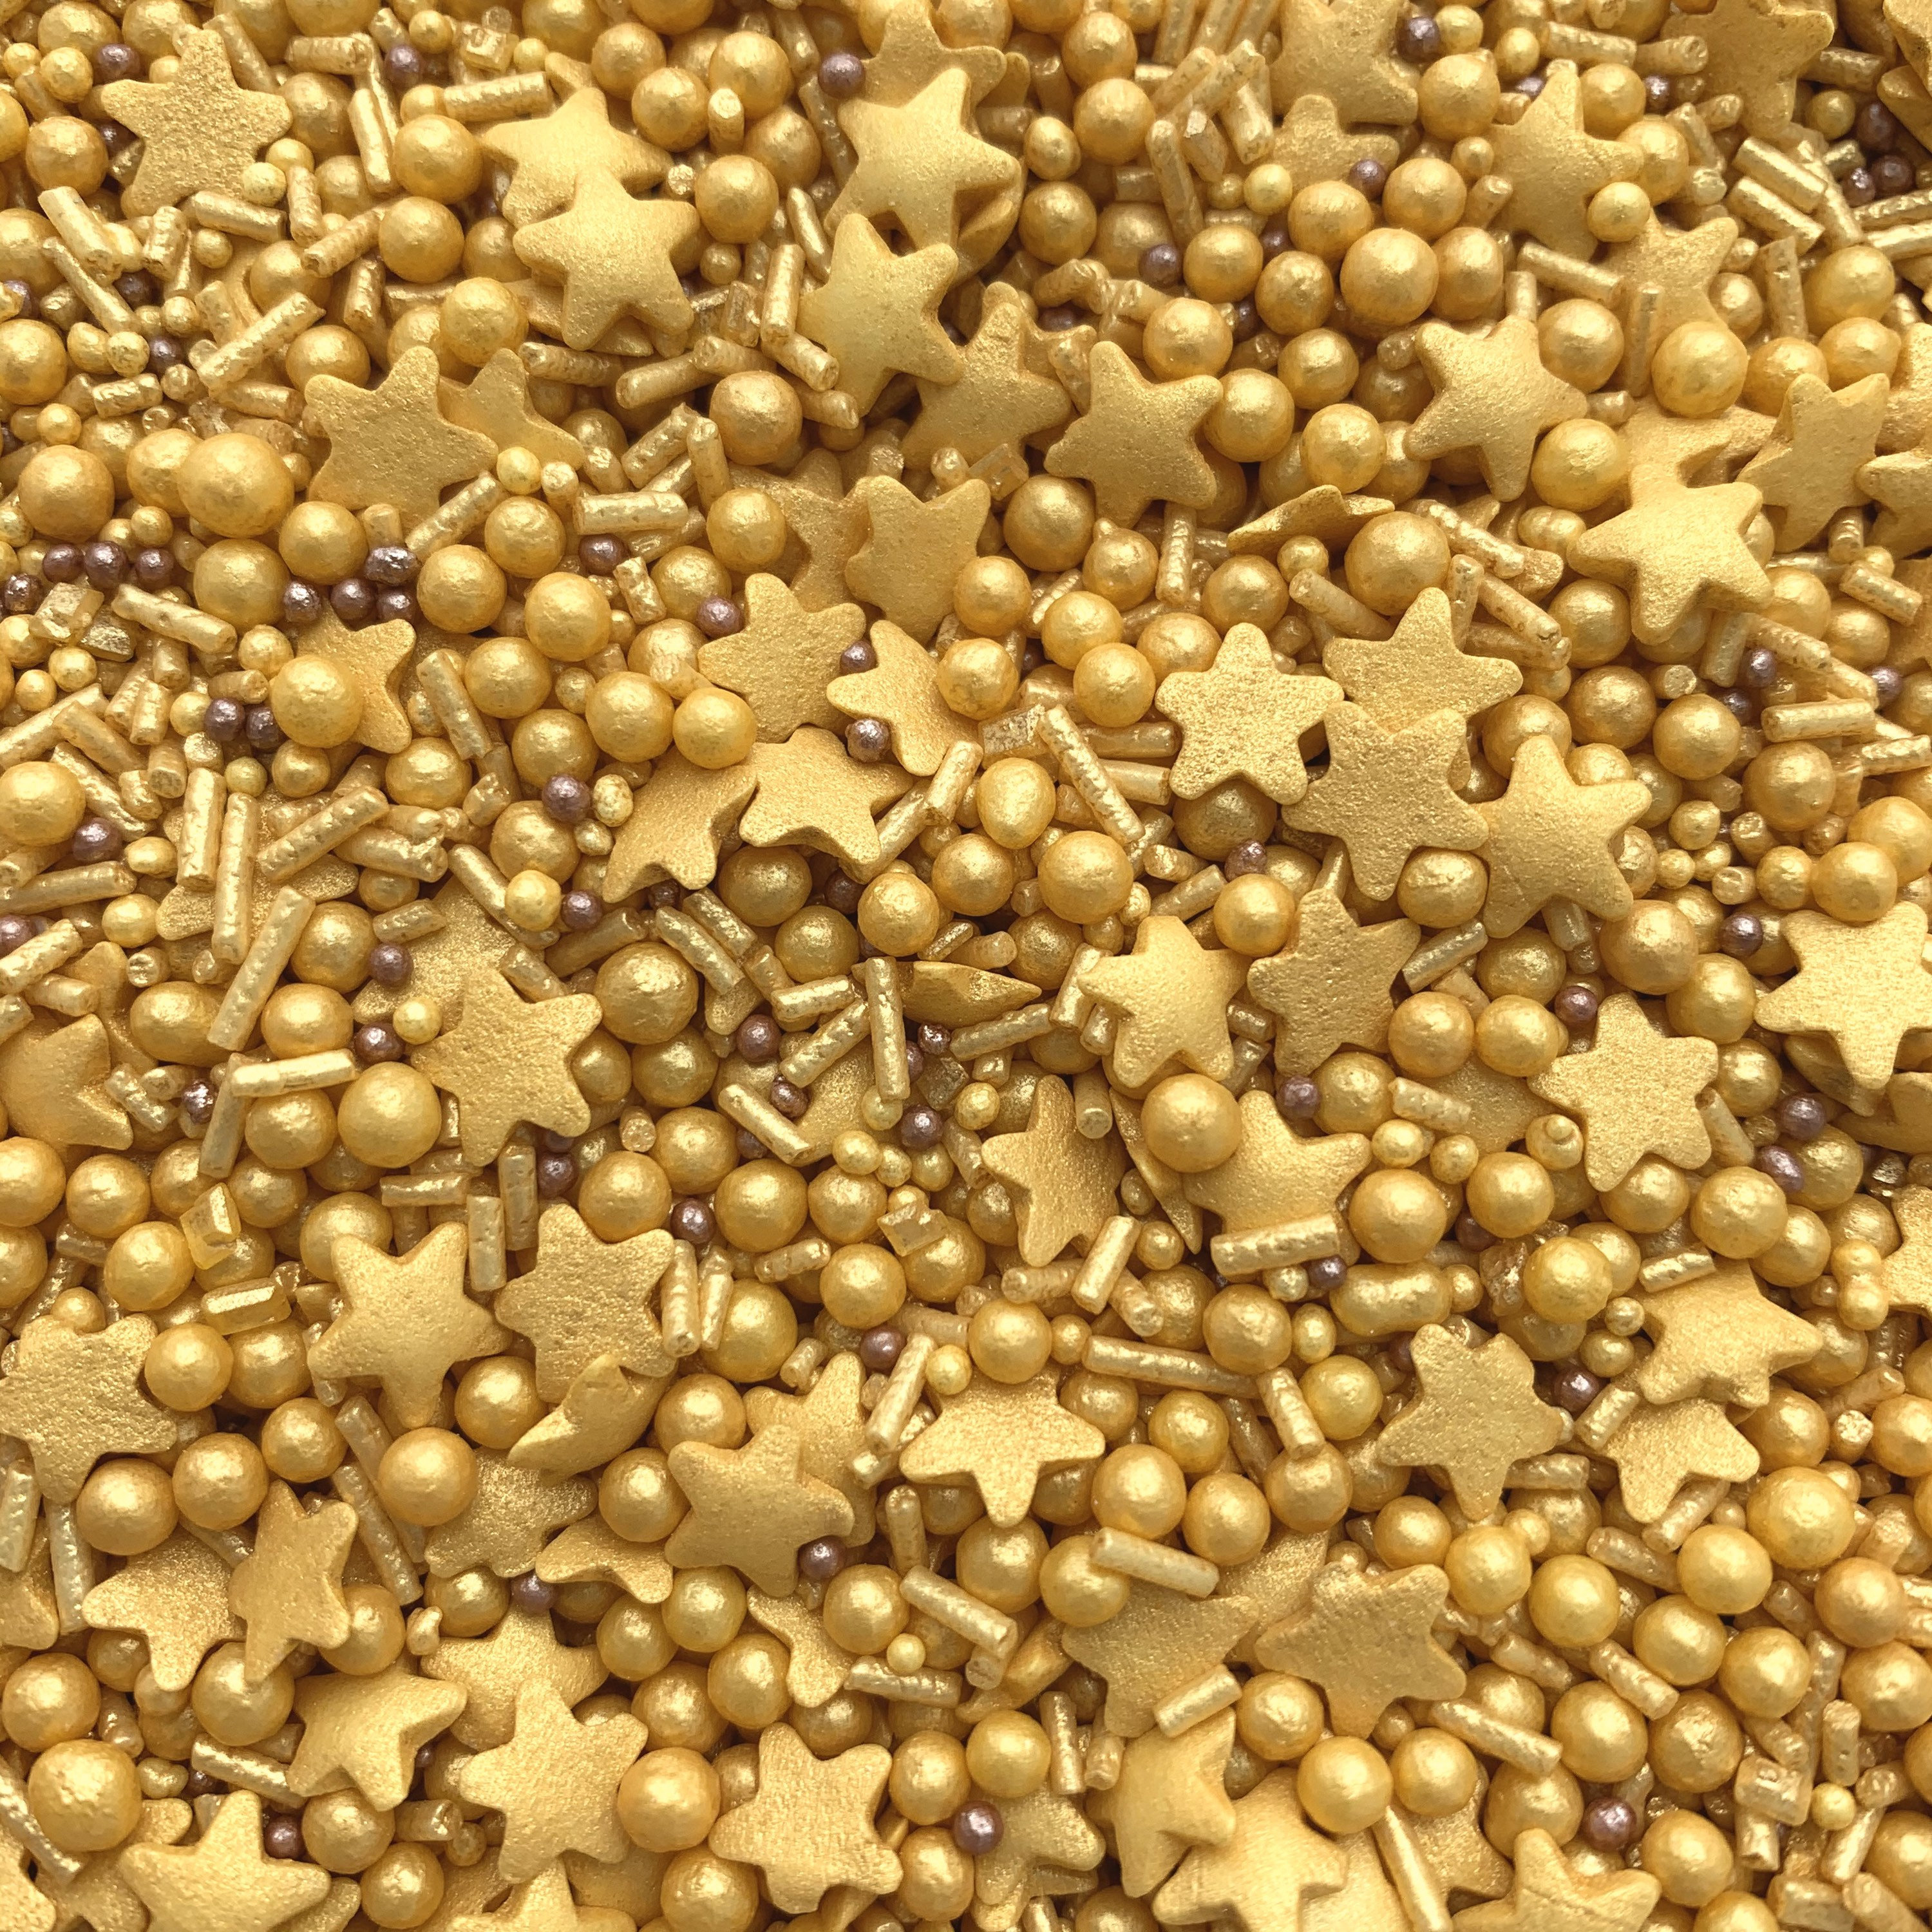 Gold star sprinkle mix. Cake decorating, cupcakes sprinkles | All That  Glitters